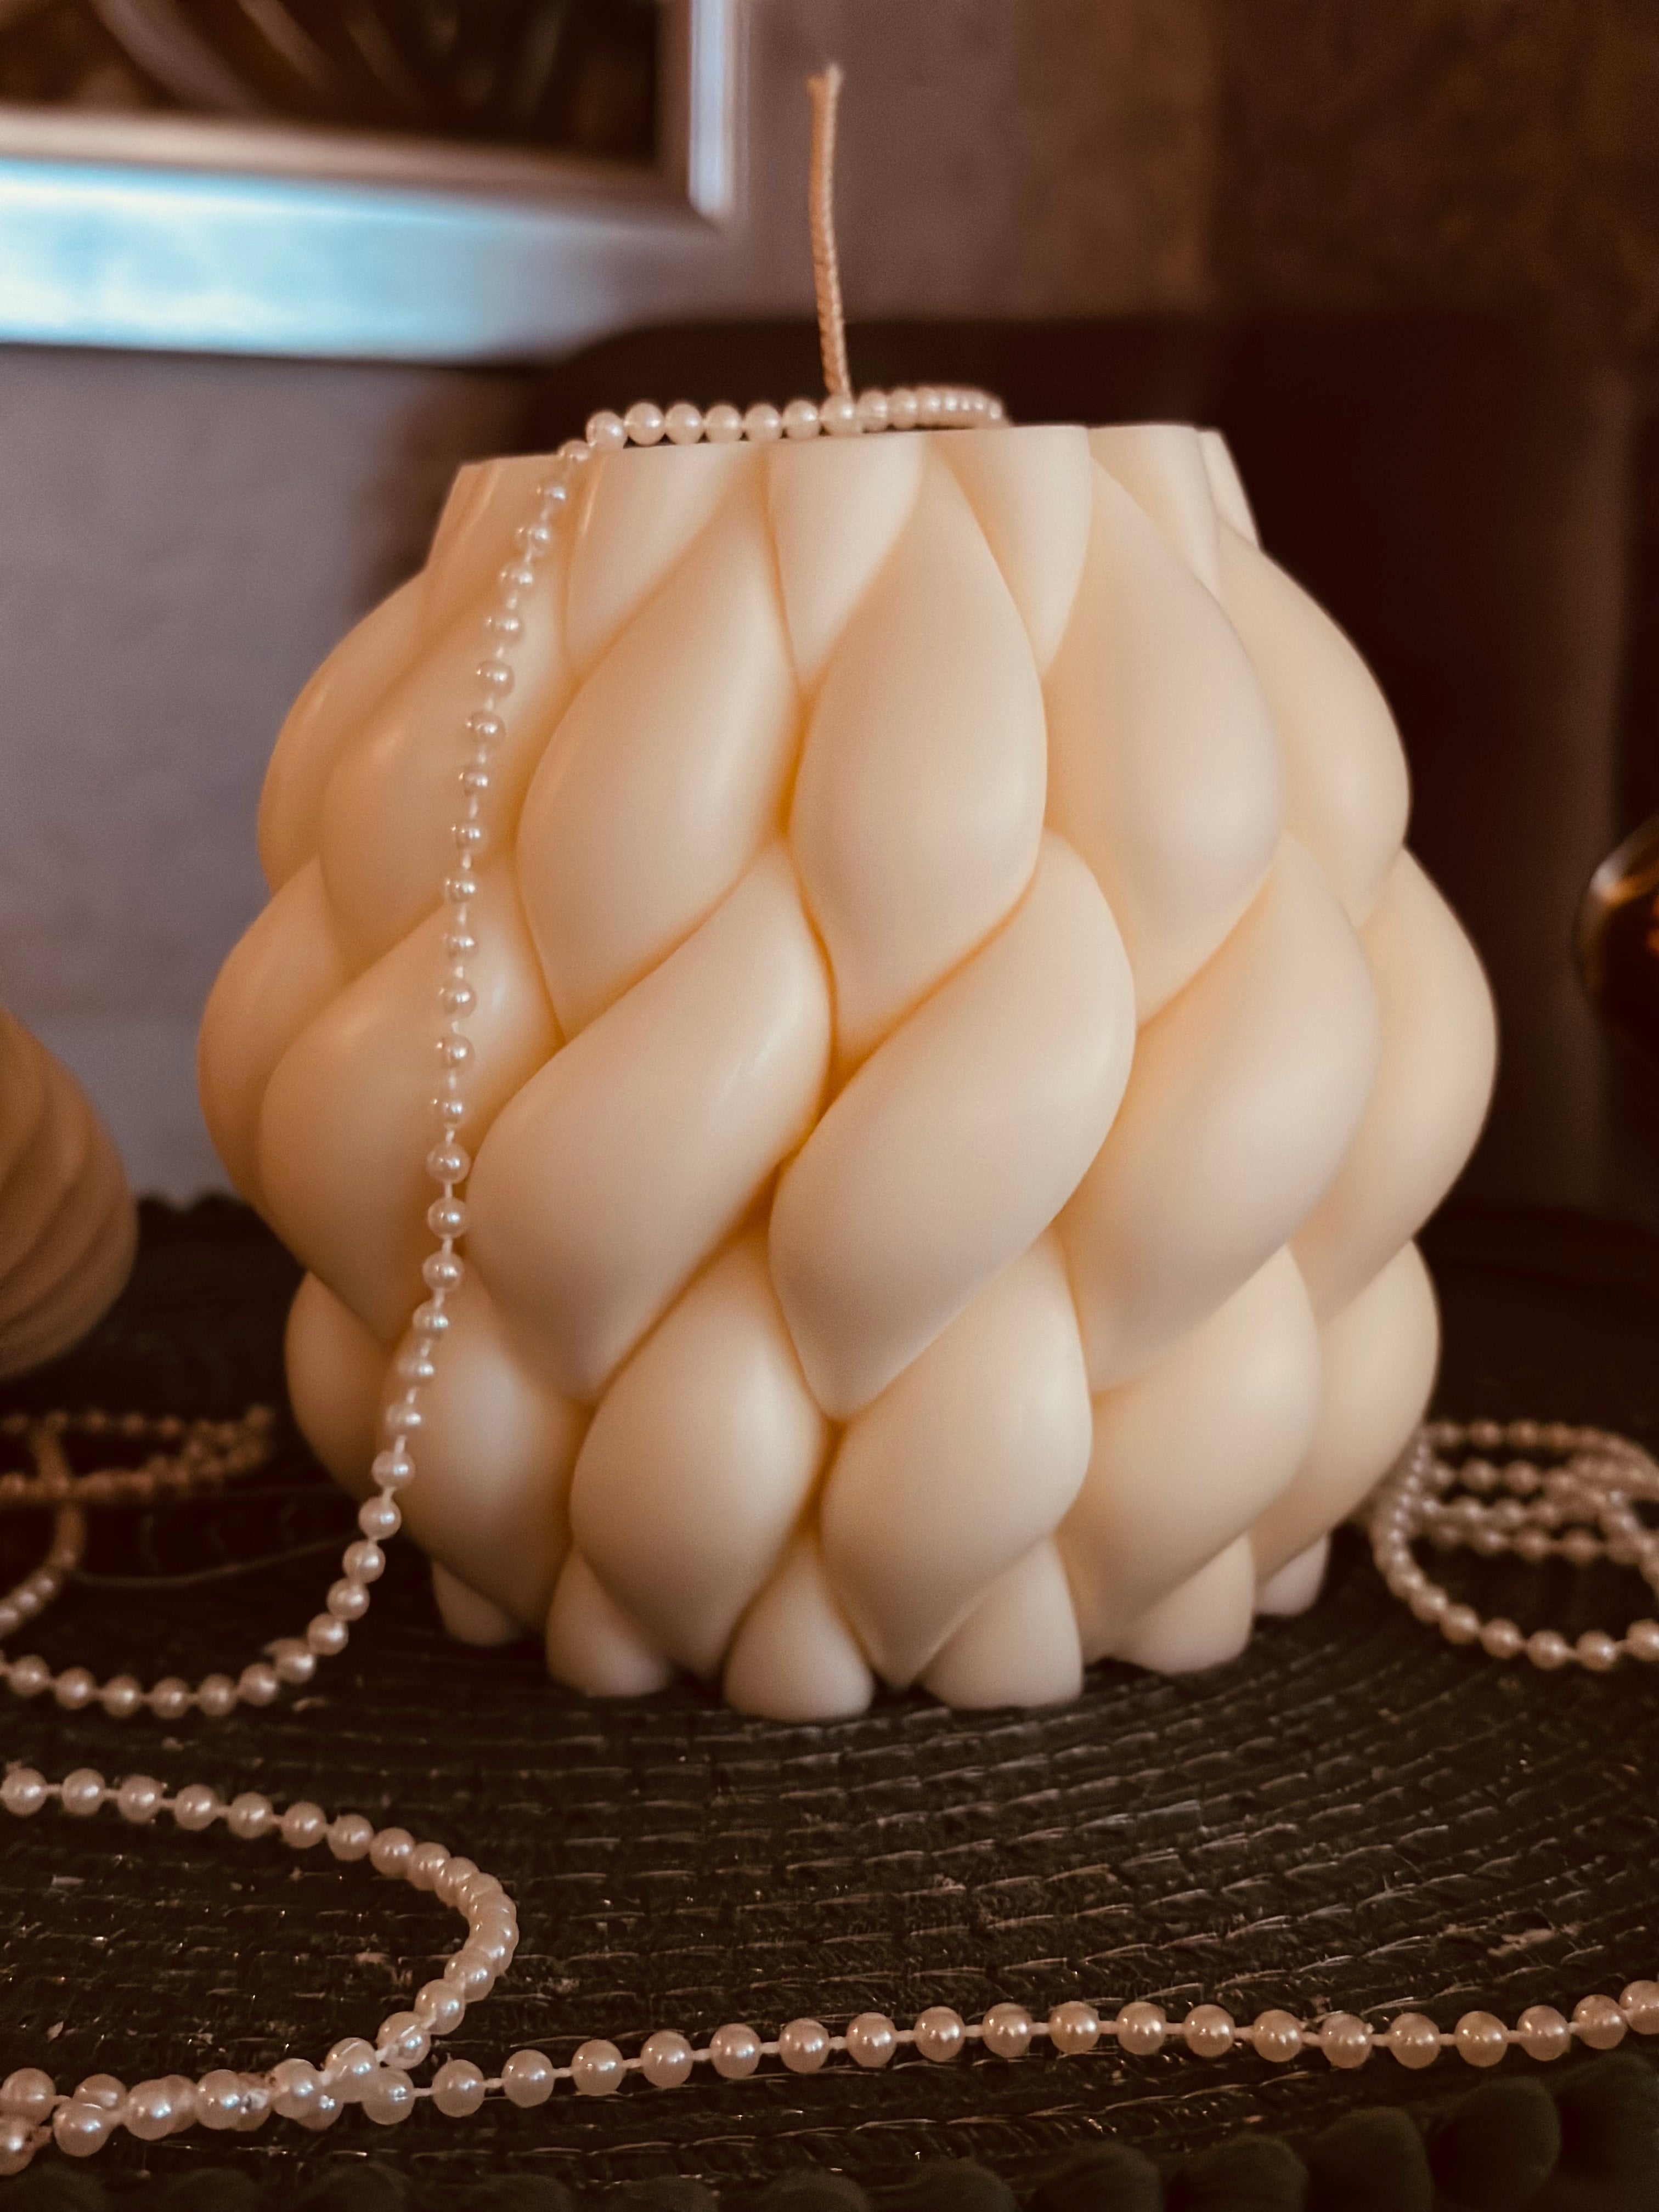 Introducing our captivating Soy Wax Extra Large Rope Pillar Candle. The rope design of this sculptural candle adds a touch of sophistication to any room.